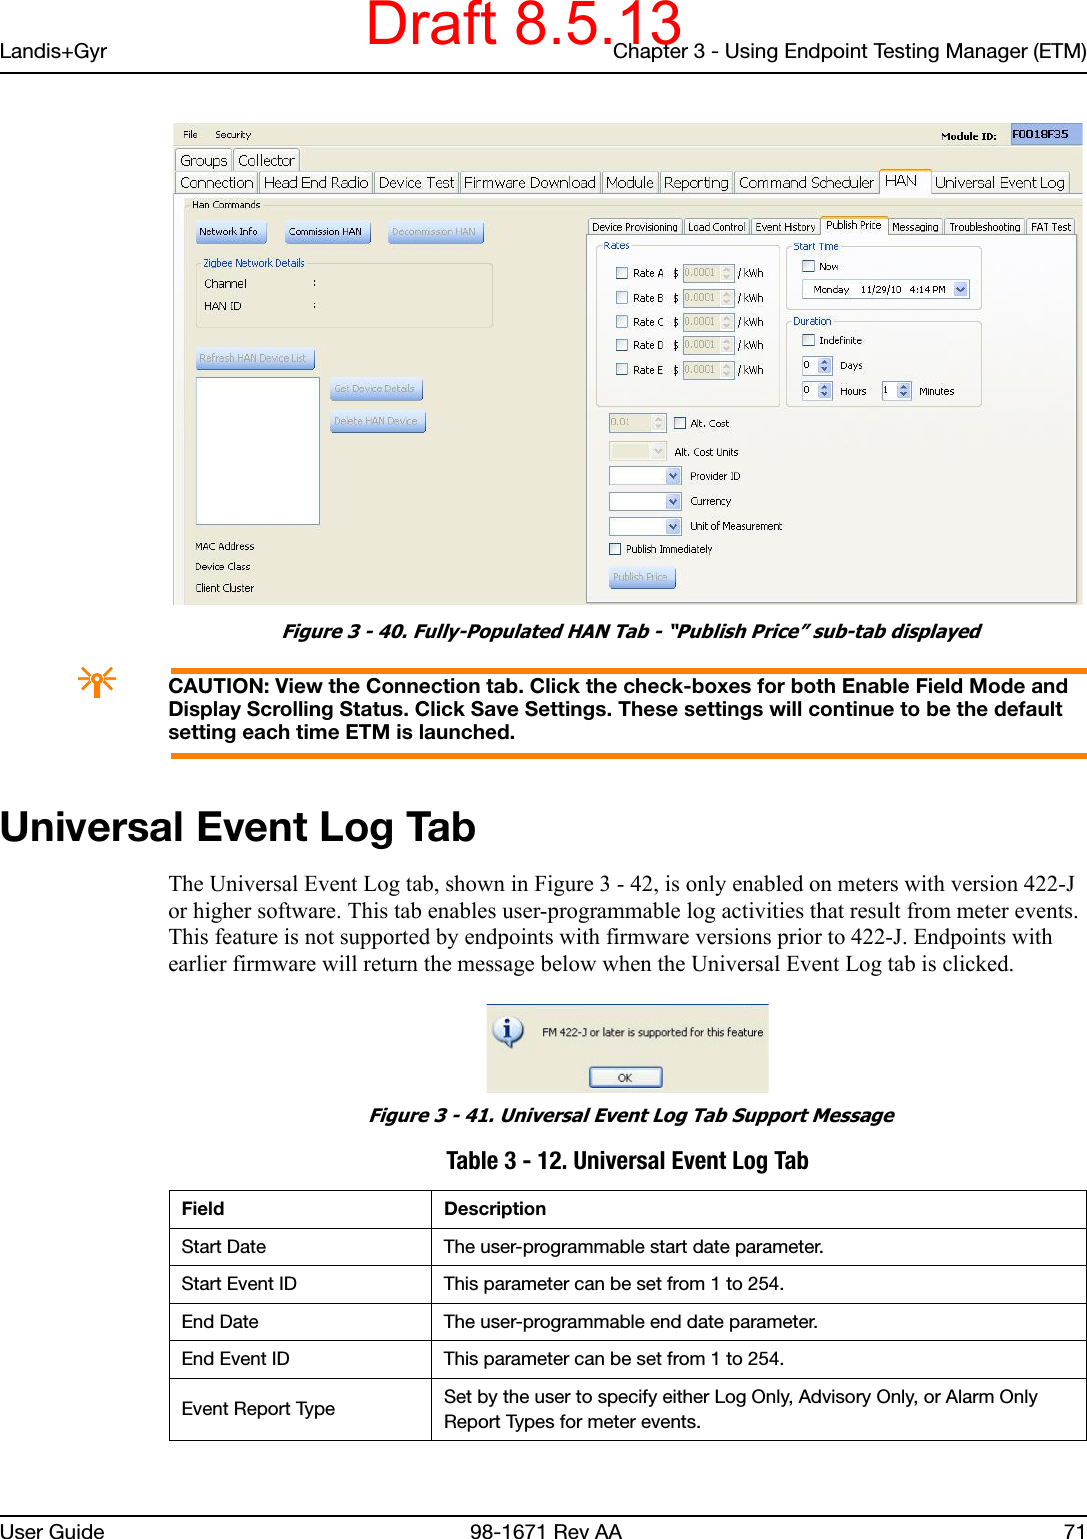 Landis+Gyr Chapter 3 - Using Endpoint Testing Manager (ETM)User Guide  98-1671 Rev AA 71 Figure 3 - 40. Fully-Populated HAN Tab - “Publish Price” sub-tab displayedACAUTION: View the Connection tab. Click the check-boxes for both Enable Field Mode and Display Scrolling Status. Click Save Settings. These settings will continue to be the default setting each time ETM is launched.Universal Event Log TabThe Universal Event Log tab, shown in Figure 3 - 42, is only enabled on meters with version 422-J or higher software. This tab enables user-programmable log activities that result from meter events. This feature is not supported by endpoints with firmware versions prior to 422-J. Endpoints with earlier firmware will return the message below when the Universal Event Log tab is clicked. Figure 3 - 41. Universal Event Log Tab Support Message Table 3 - 12. Universal Event Log TabField DescriptionStart Date The user-programmable start date parameter.Start Event ID This parameter can be set from 1 to 254.End Date The user-programmable end date parameter.End Event ID This parameter can be set from 1 to 254.Event Report Type Set by the user to specify either Log Only, Advisory Only, or Alarm Only Report Types for meter events.Draft 8.5.13